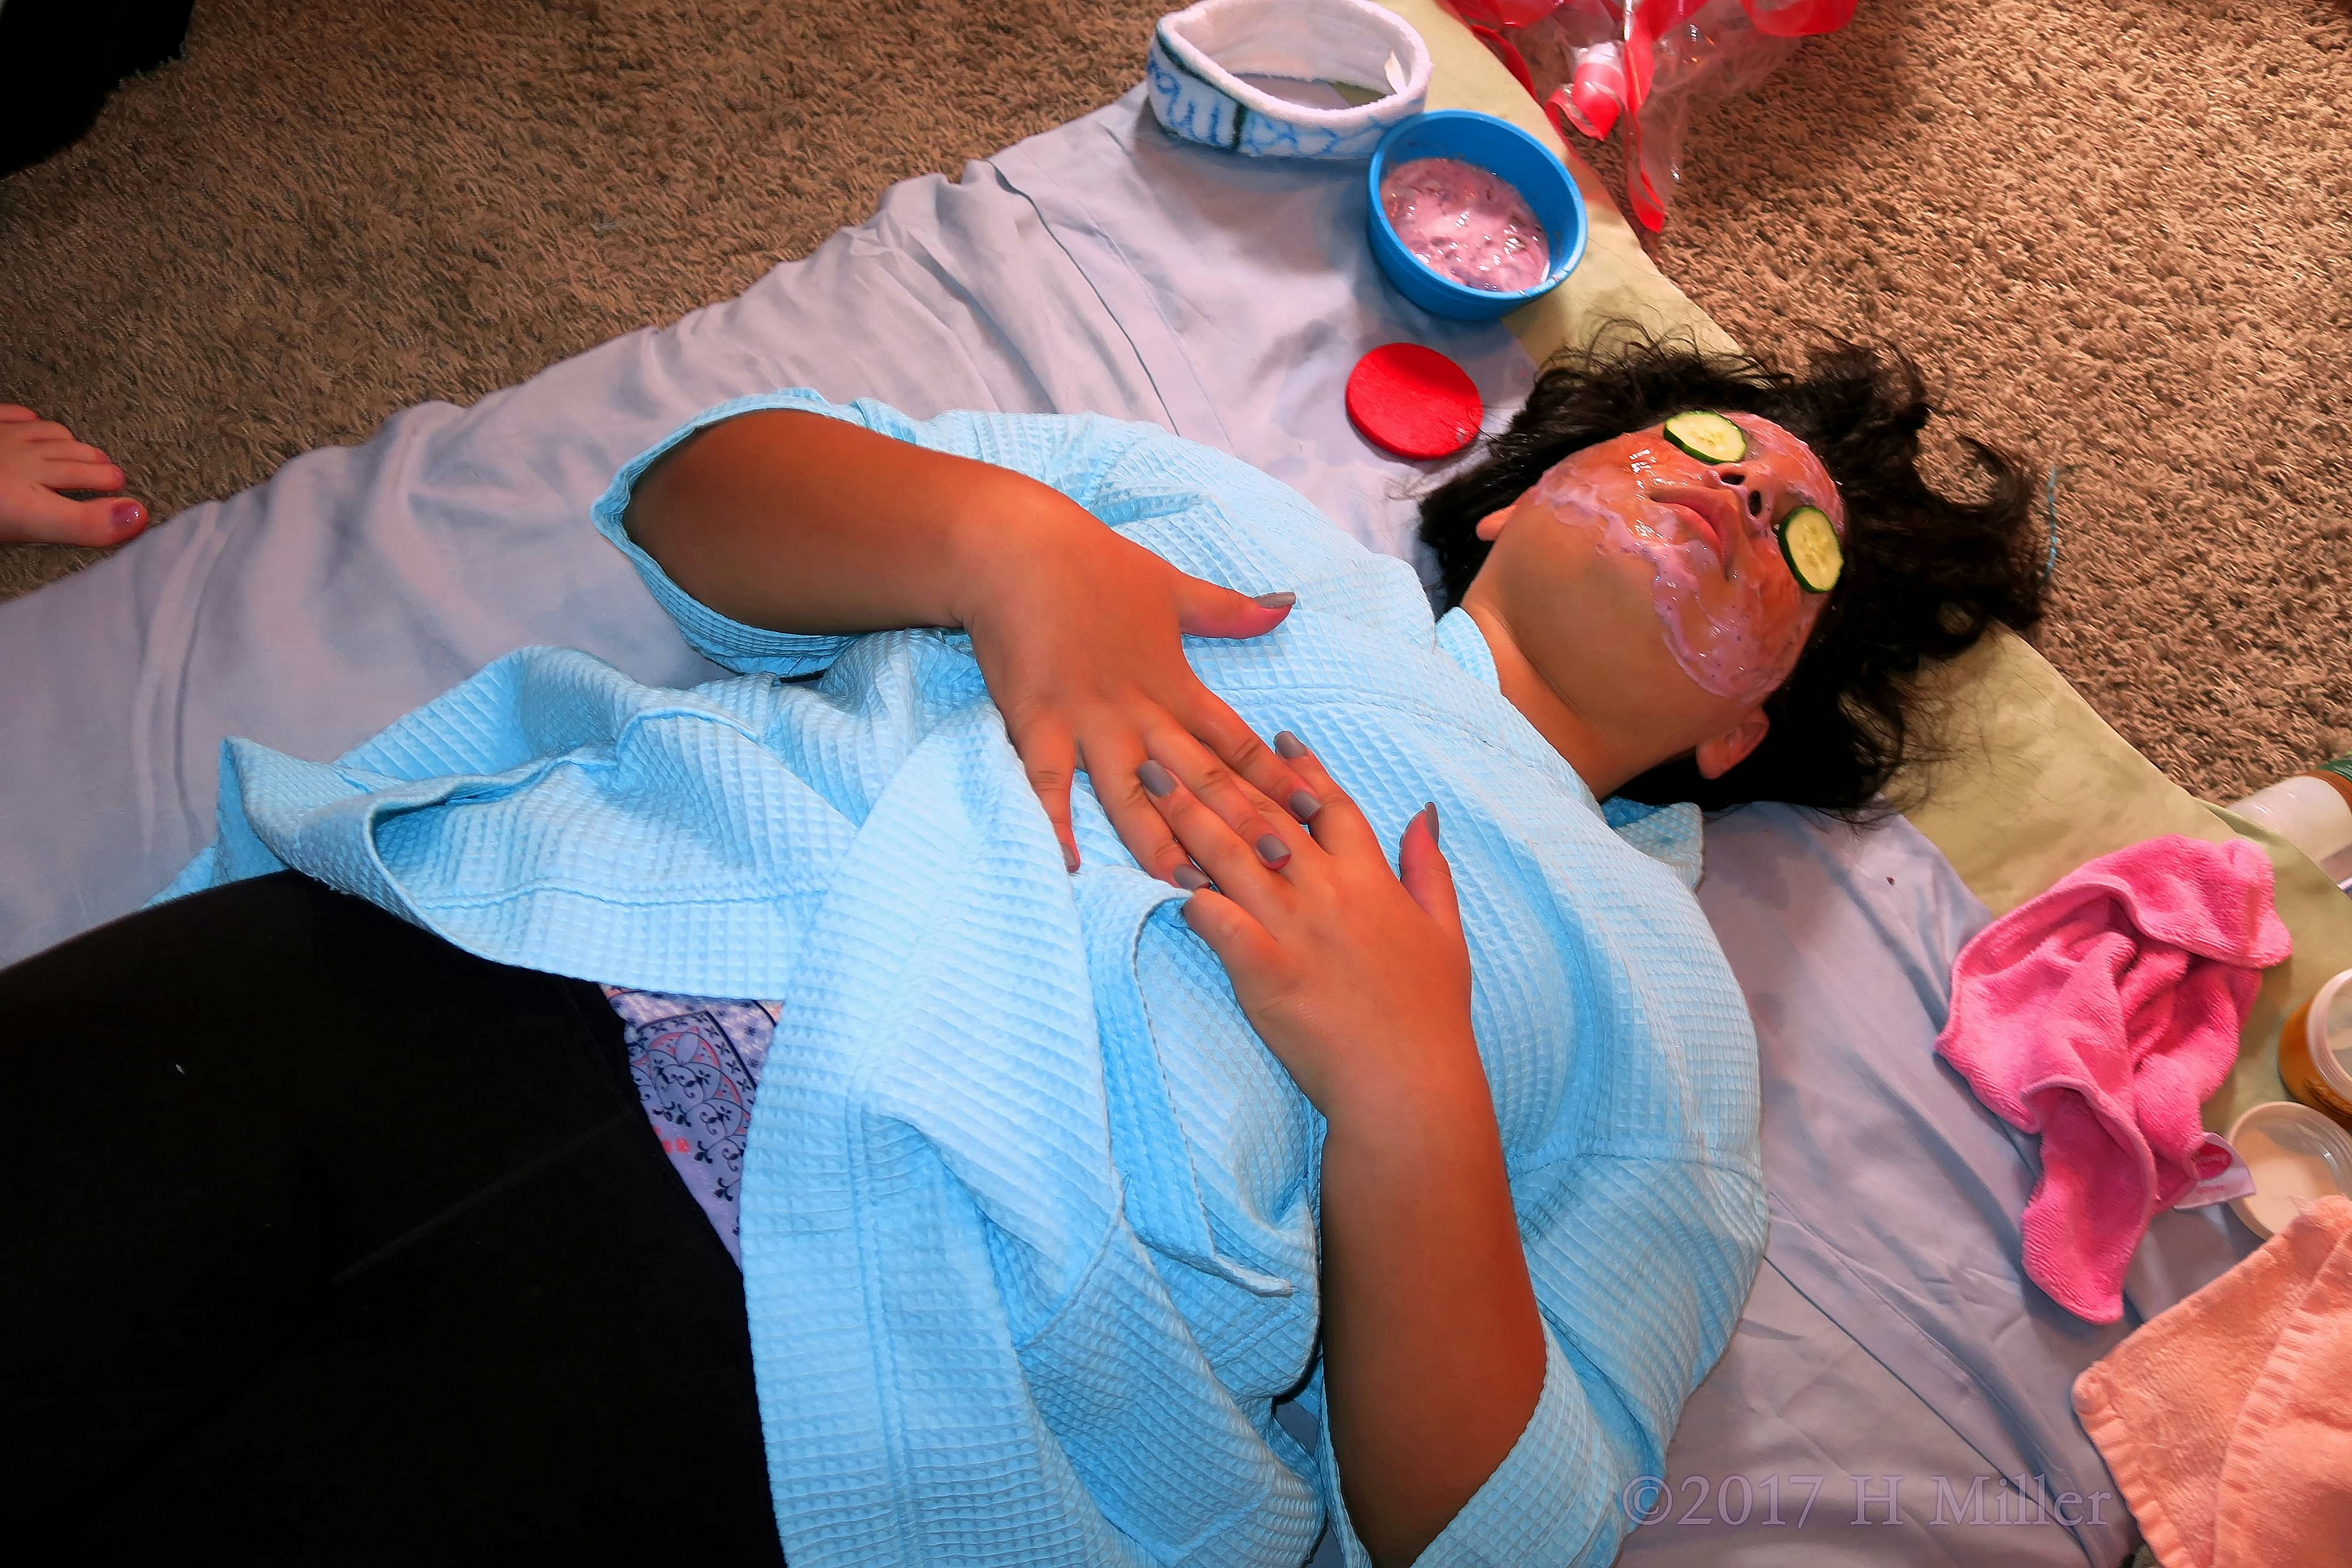 Relaxing During Her Facial At The Girls Spa Party 